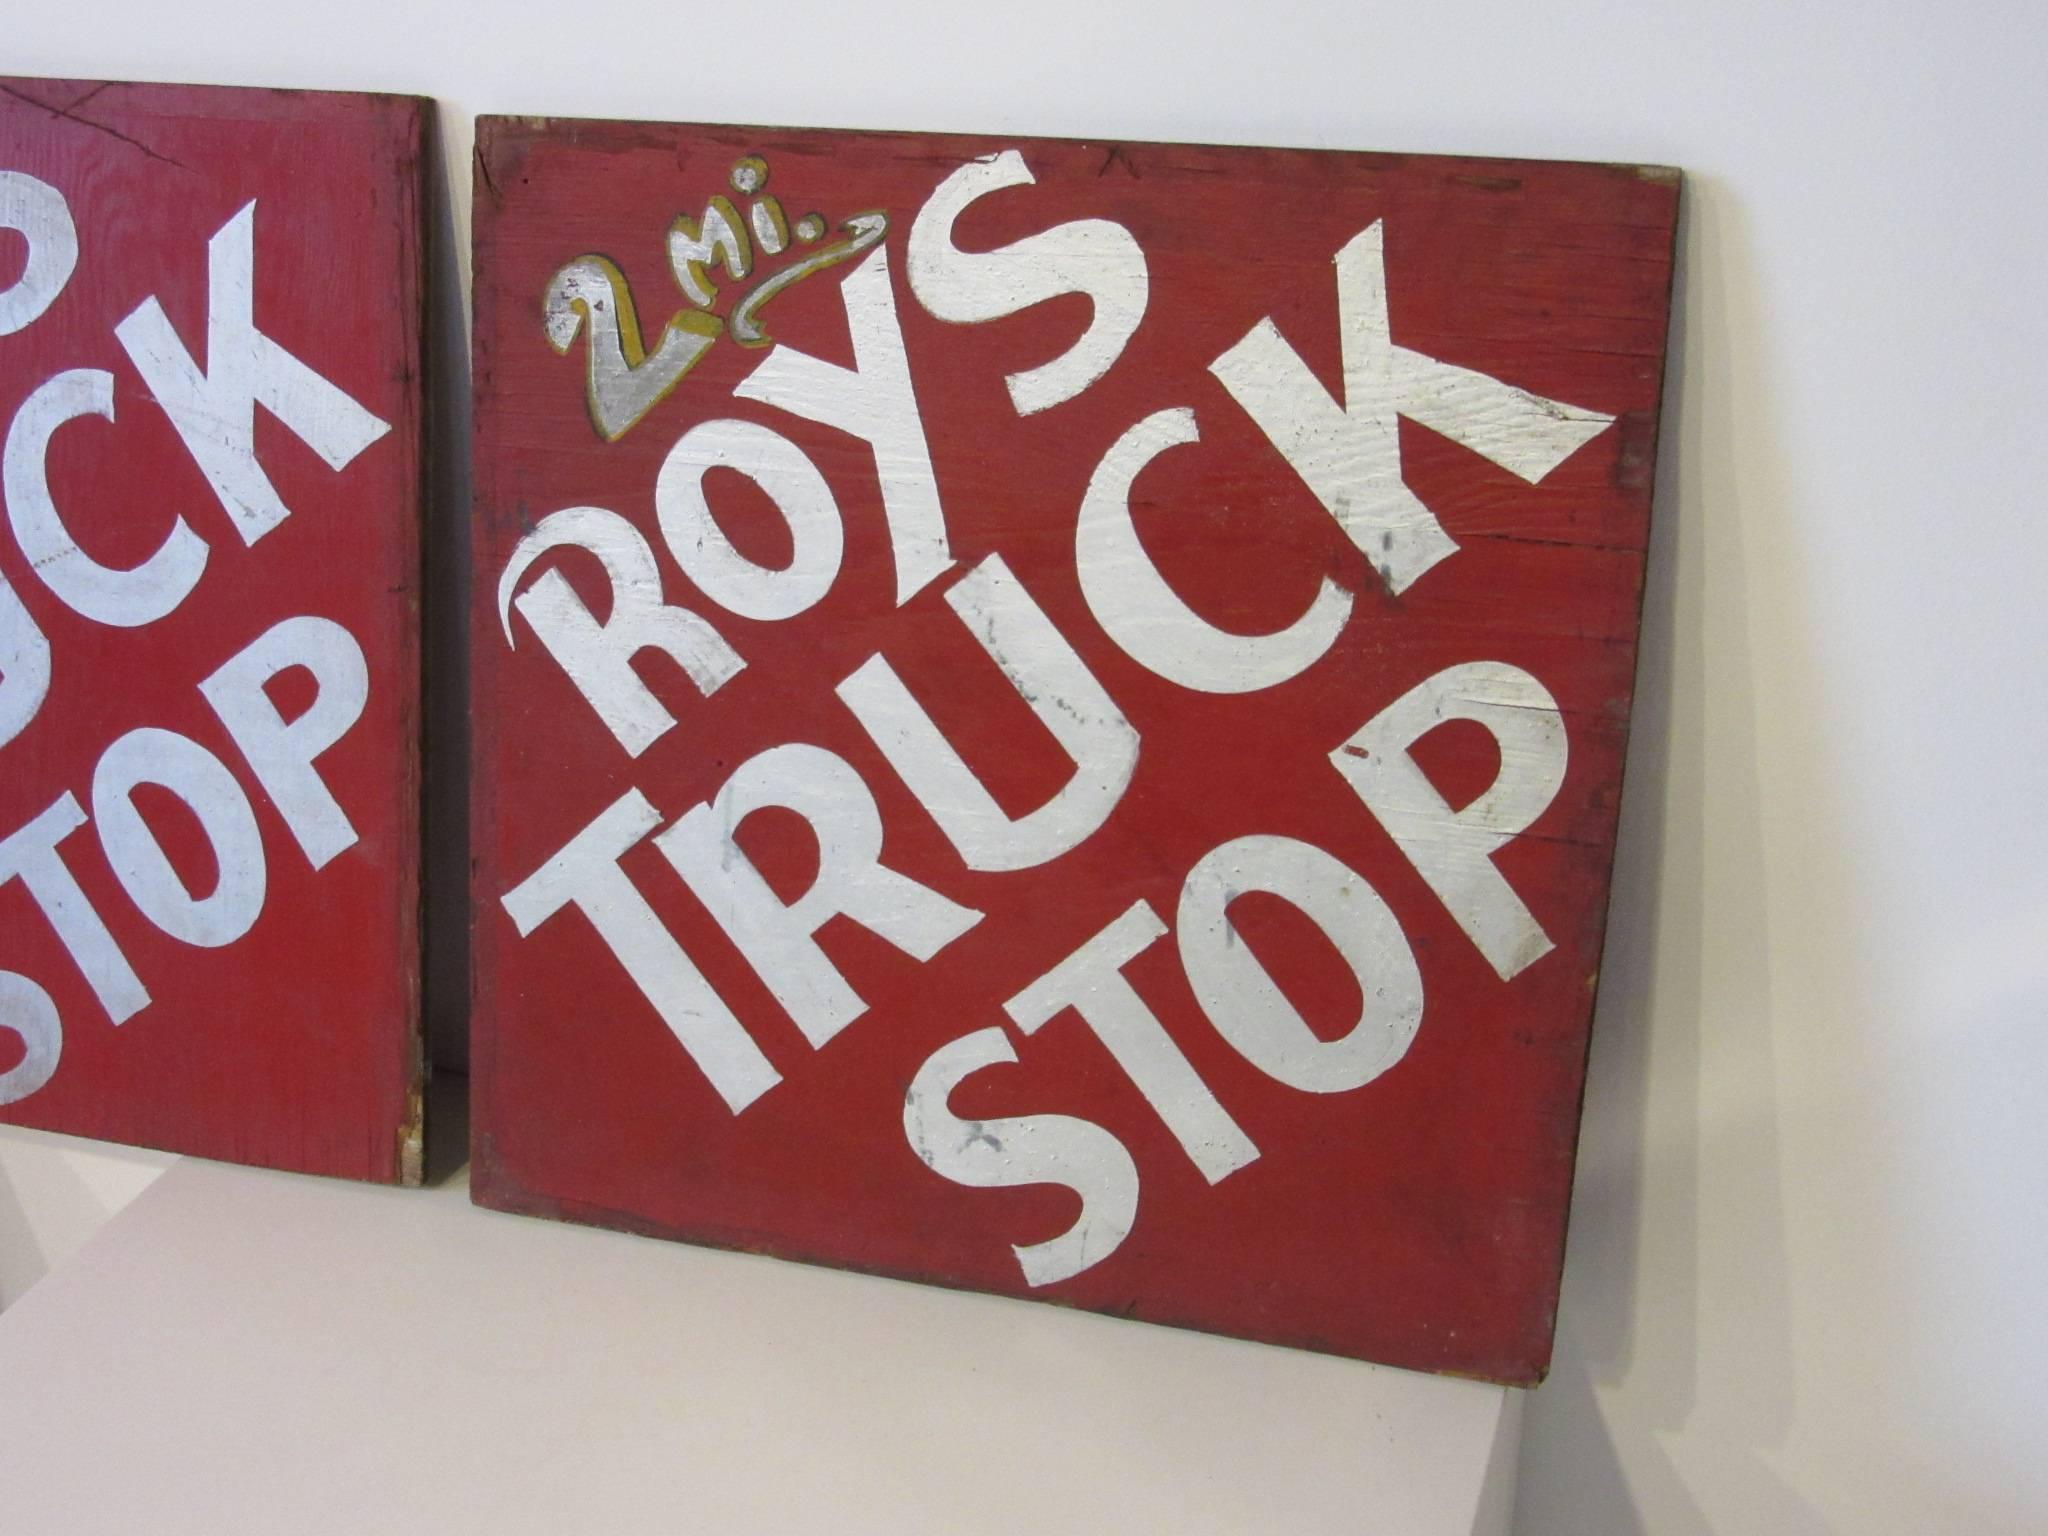 A set of three hand-painted Folk Art plywood directional signs with mileage count down in the style of the old Burma Shave signs. Silver roofing paint was used in the lettering with yellow highlights.